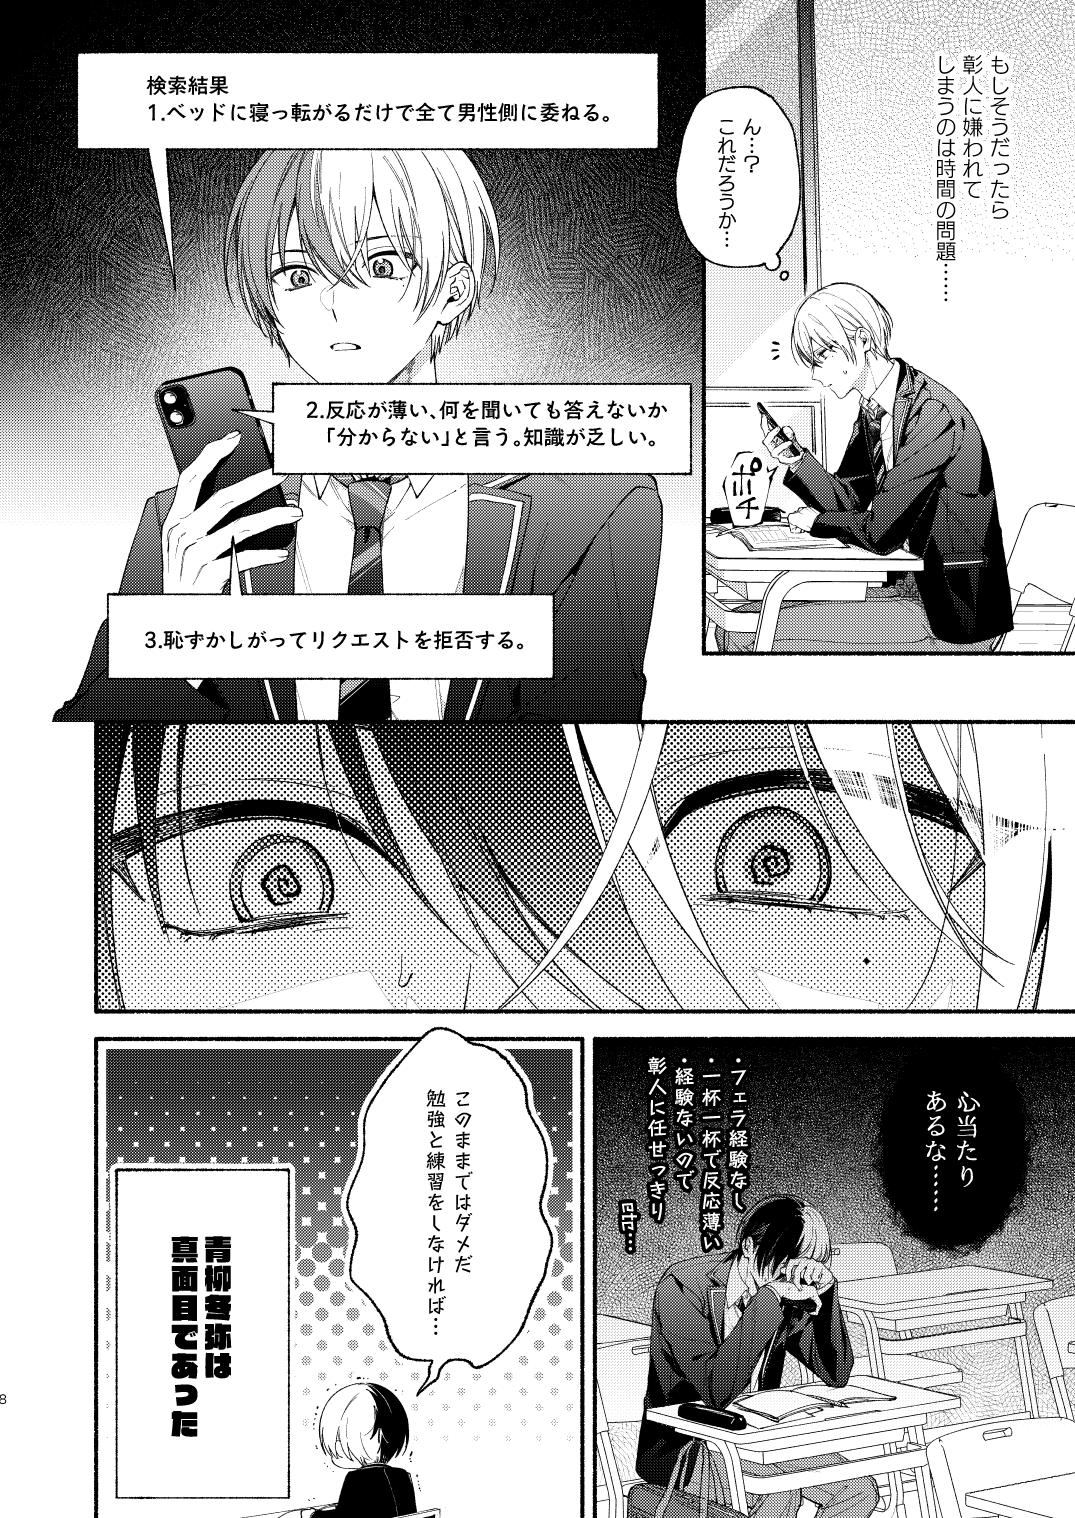 Suckingdick Chotto Renshuu Sasete Kure | Let me practice a little - Project sekai For - Page 7